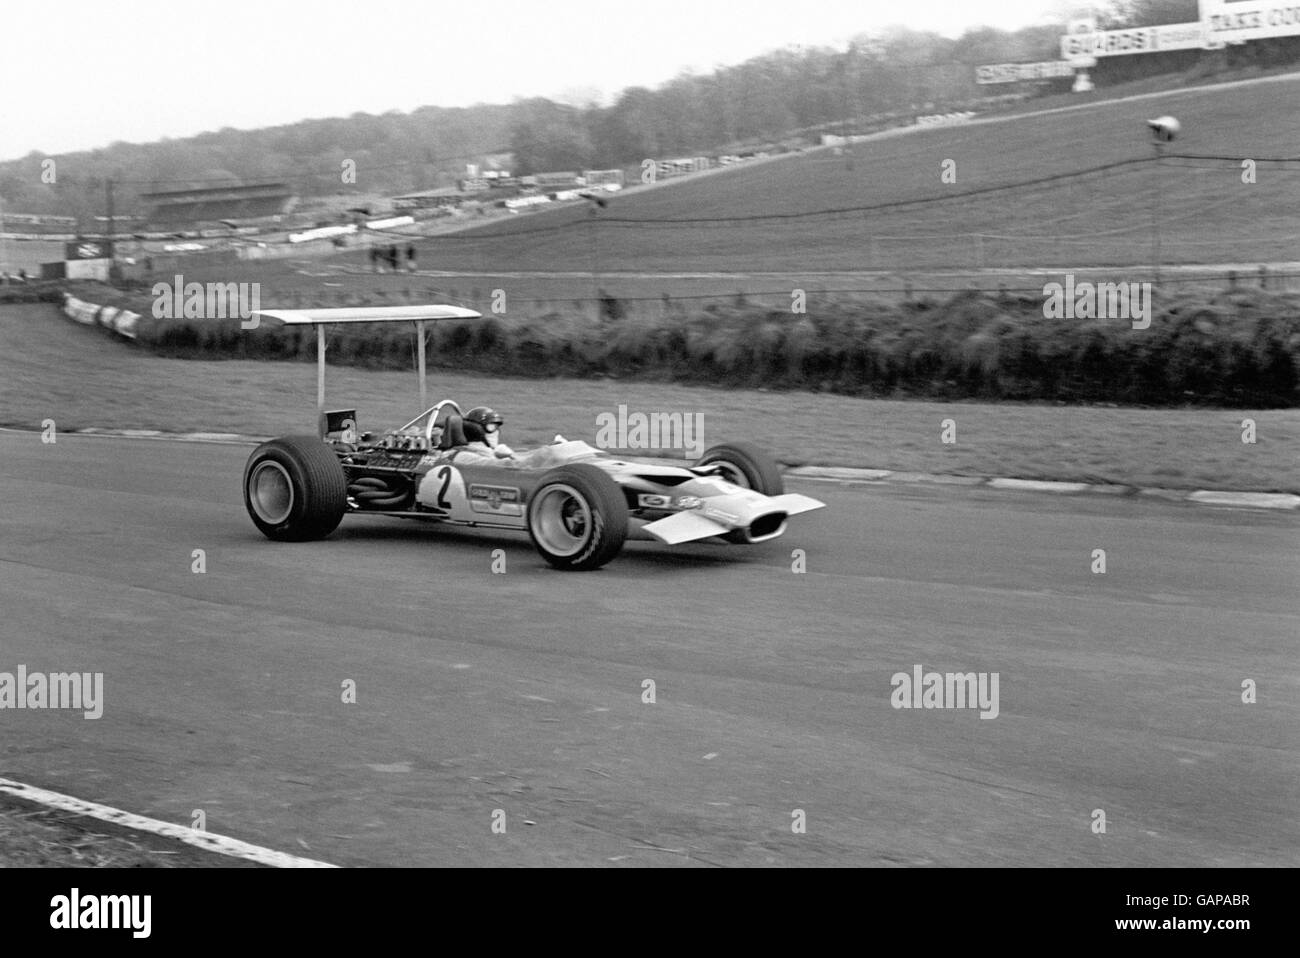 Motor Racing - Daily Mail Race of Champions - Brands Hatch - 1969. A Lotus Ford car, with airfoils fitted, in action. Stock Photo